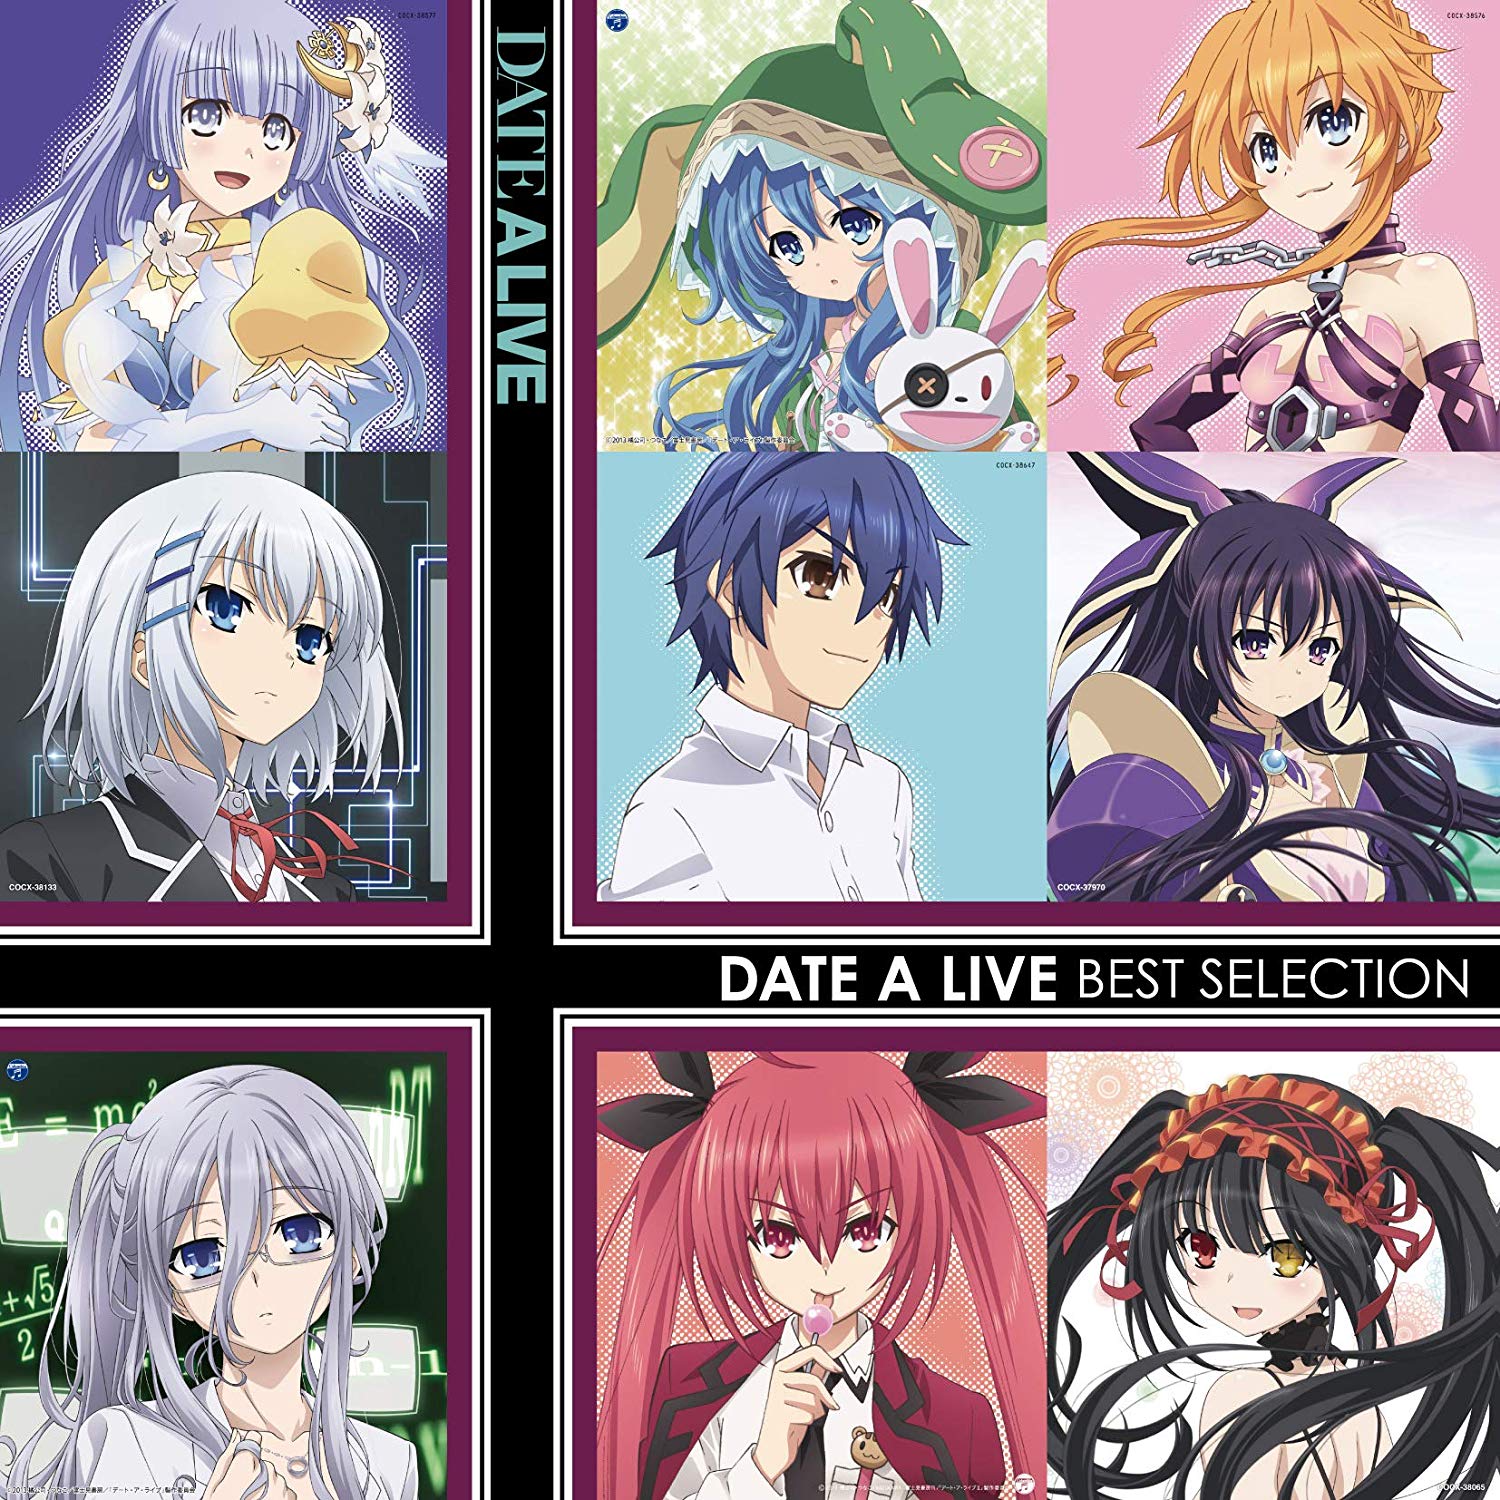 DATE A LIVE BEST select ION～ - Osanime